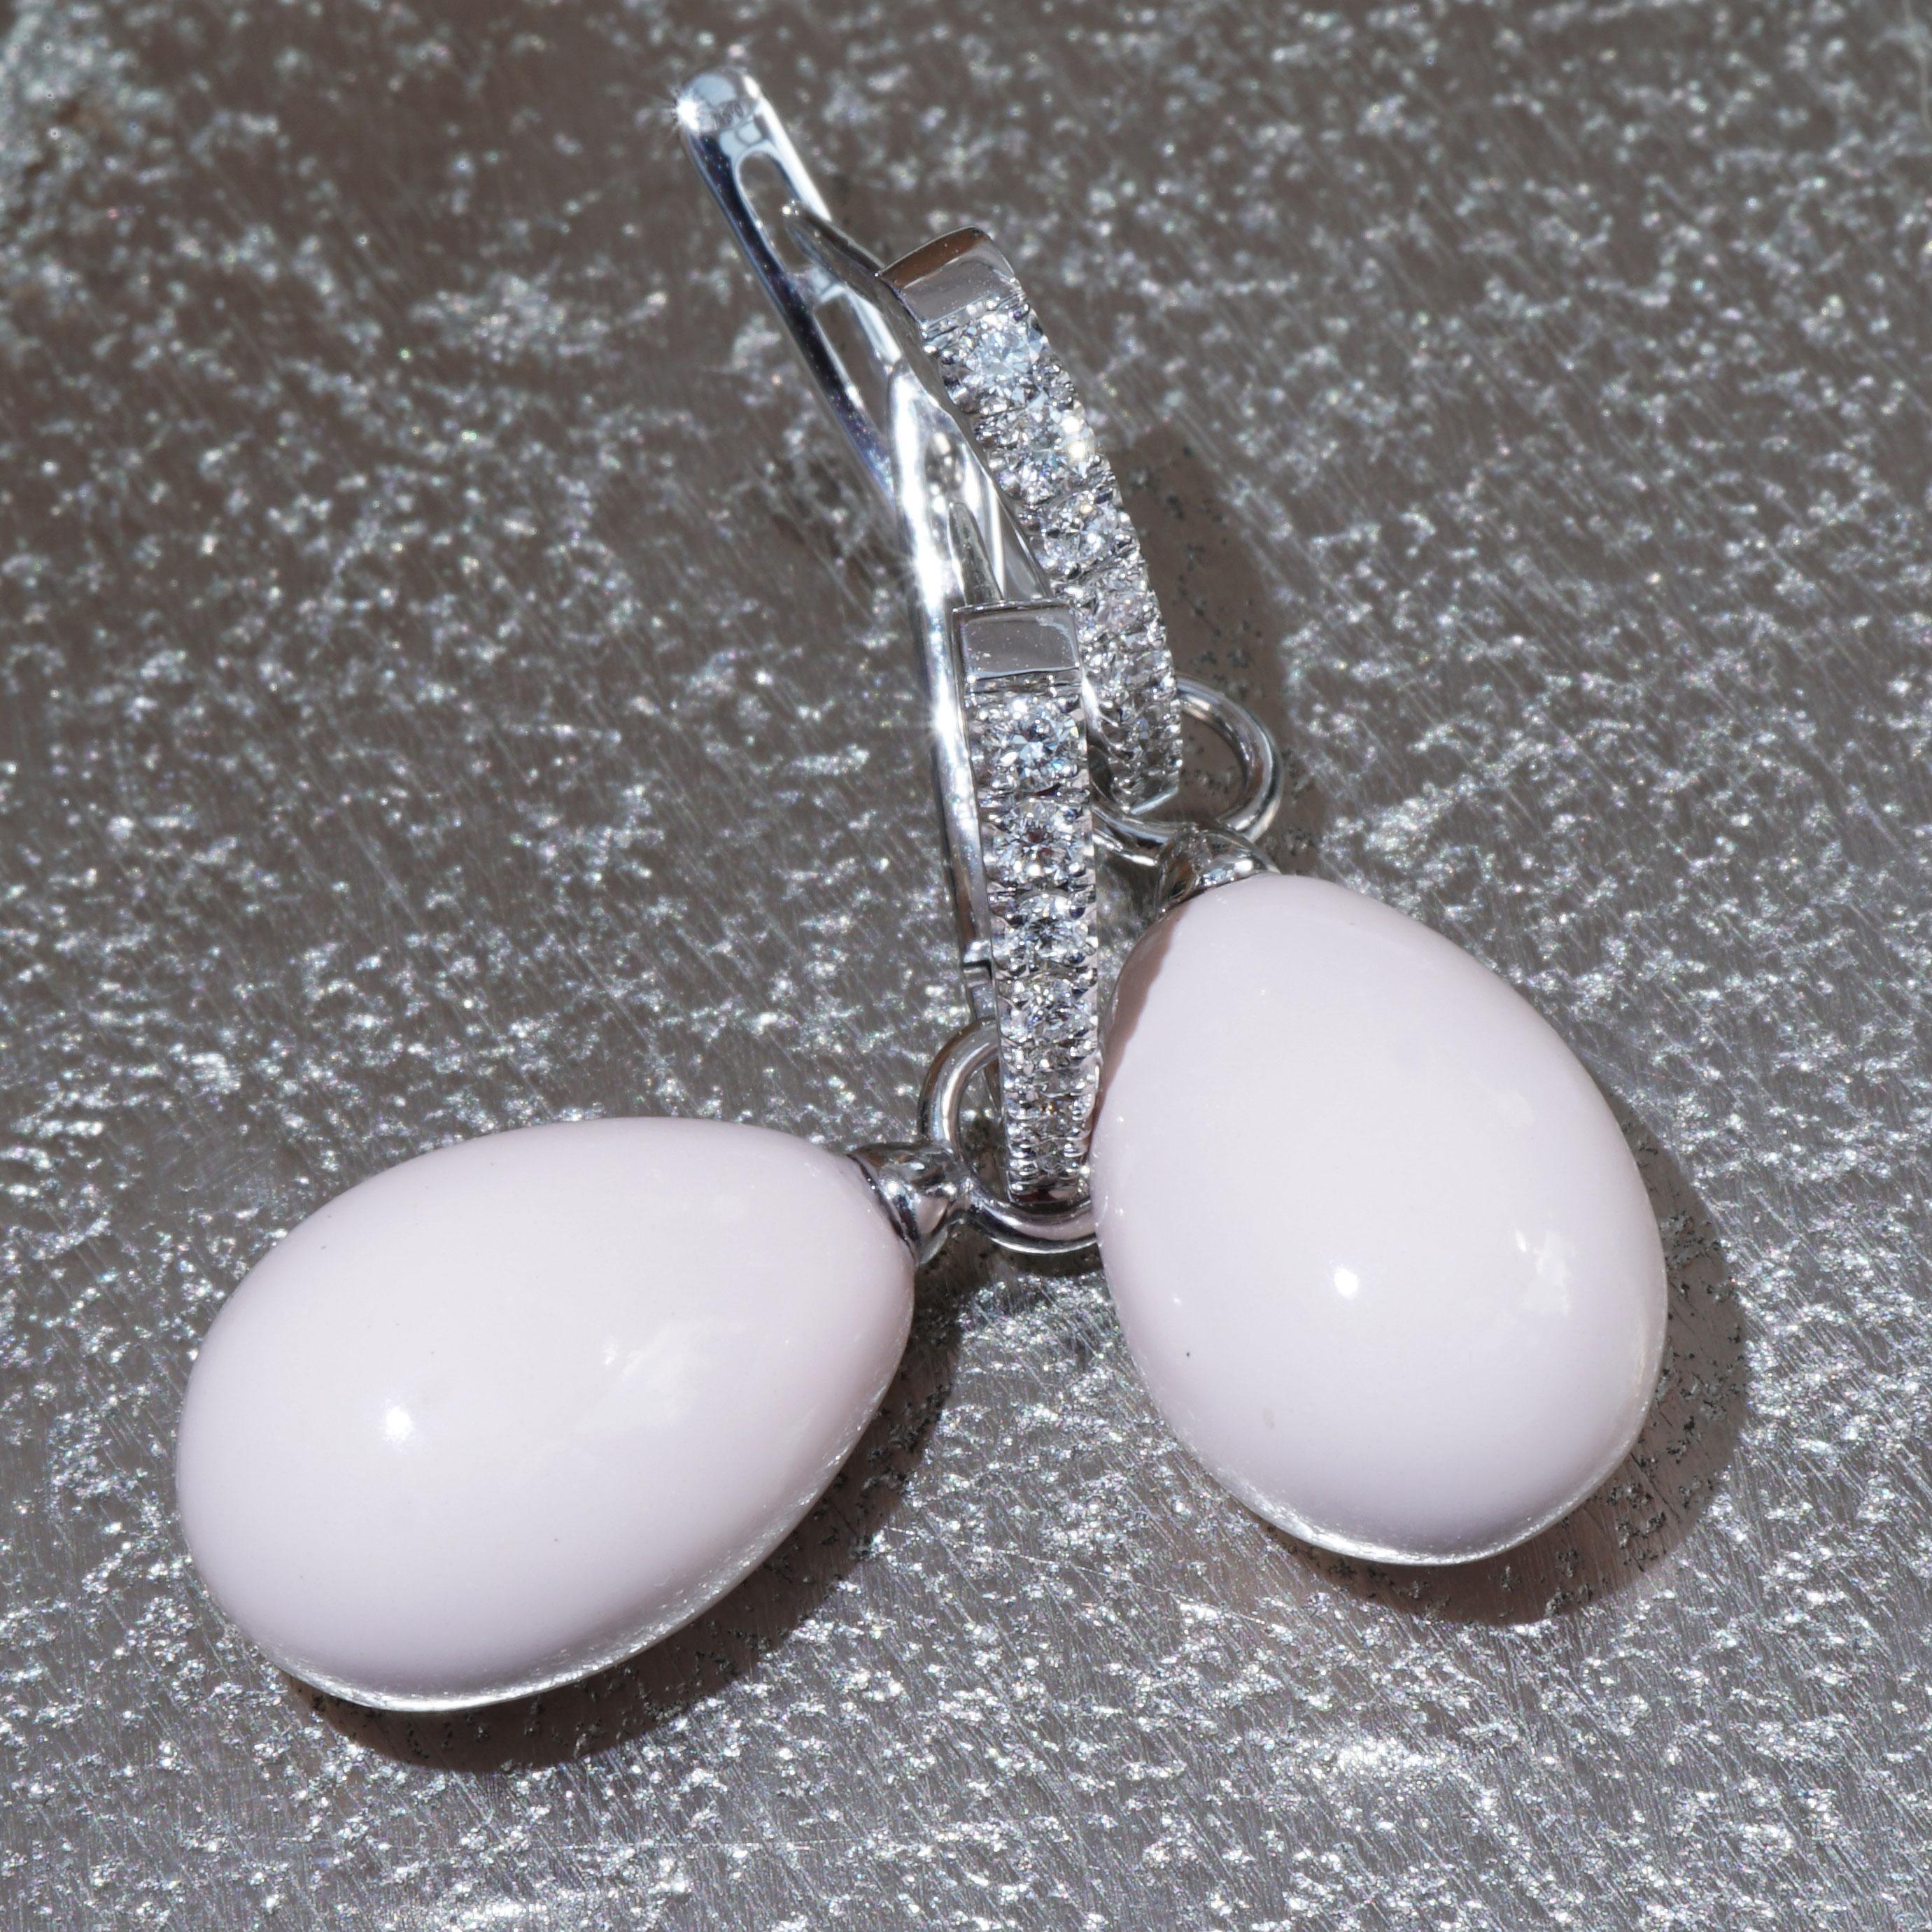 made in a traditional Italian workshop in Valenza, FINE coral drops in the coveted color delicate pink angel skin of total approx. 15.39 ct, AAA+, approx. 15 x 9 x 10 mm in size, worked as a pendant to hang and matching three-quarter hoop earrings